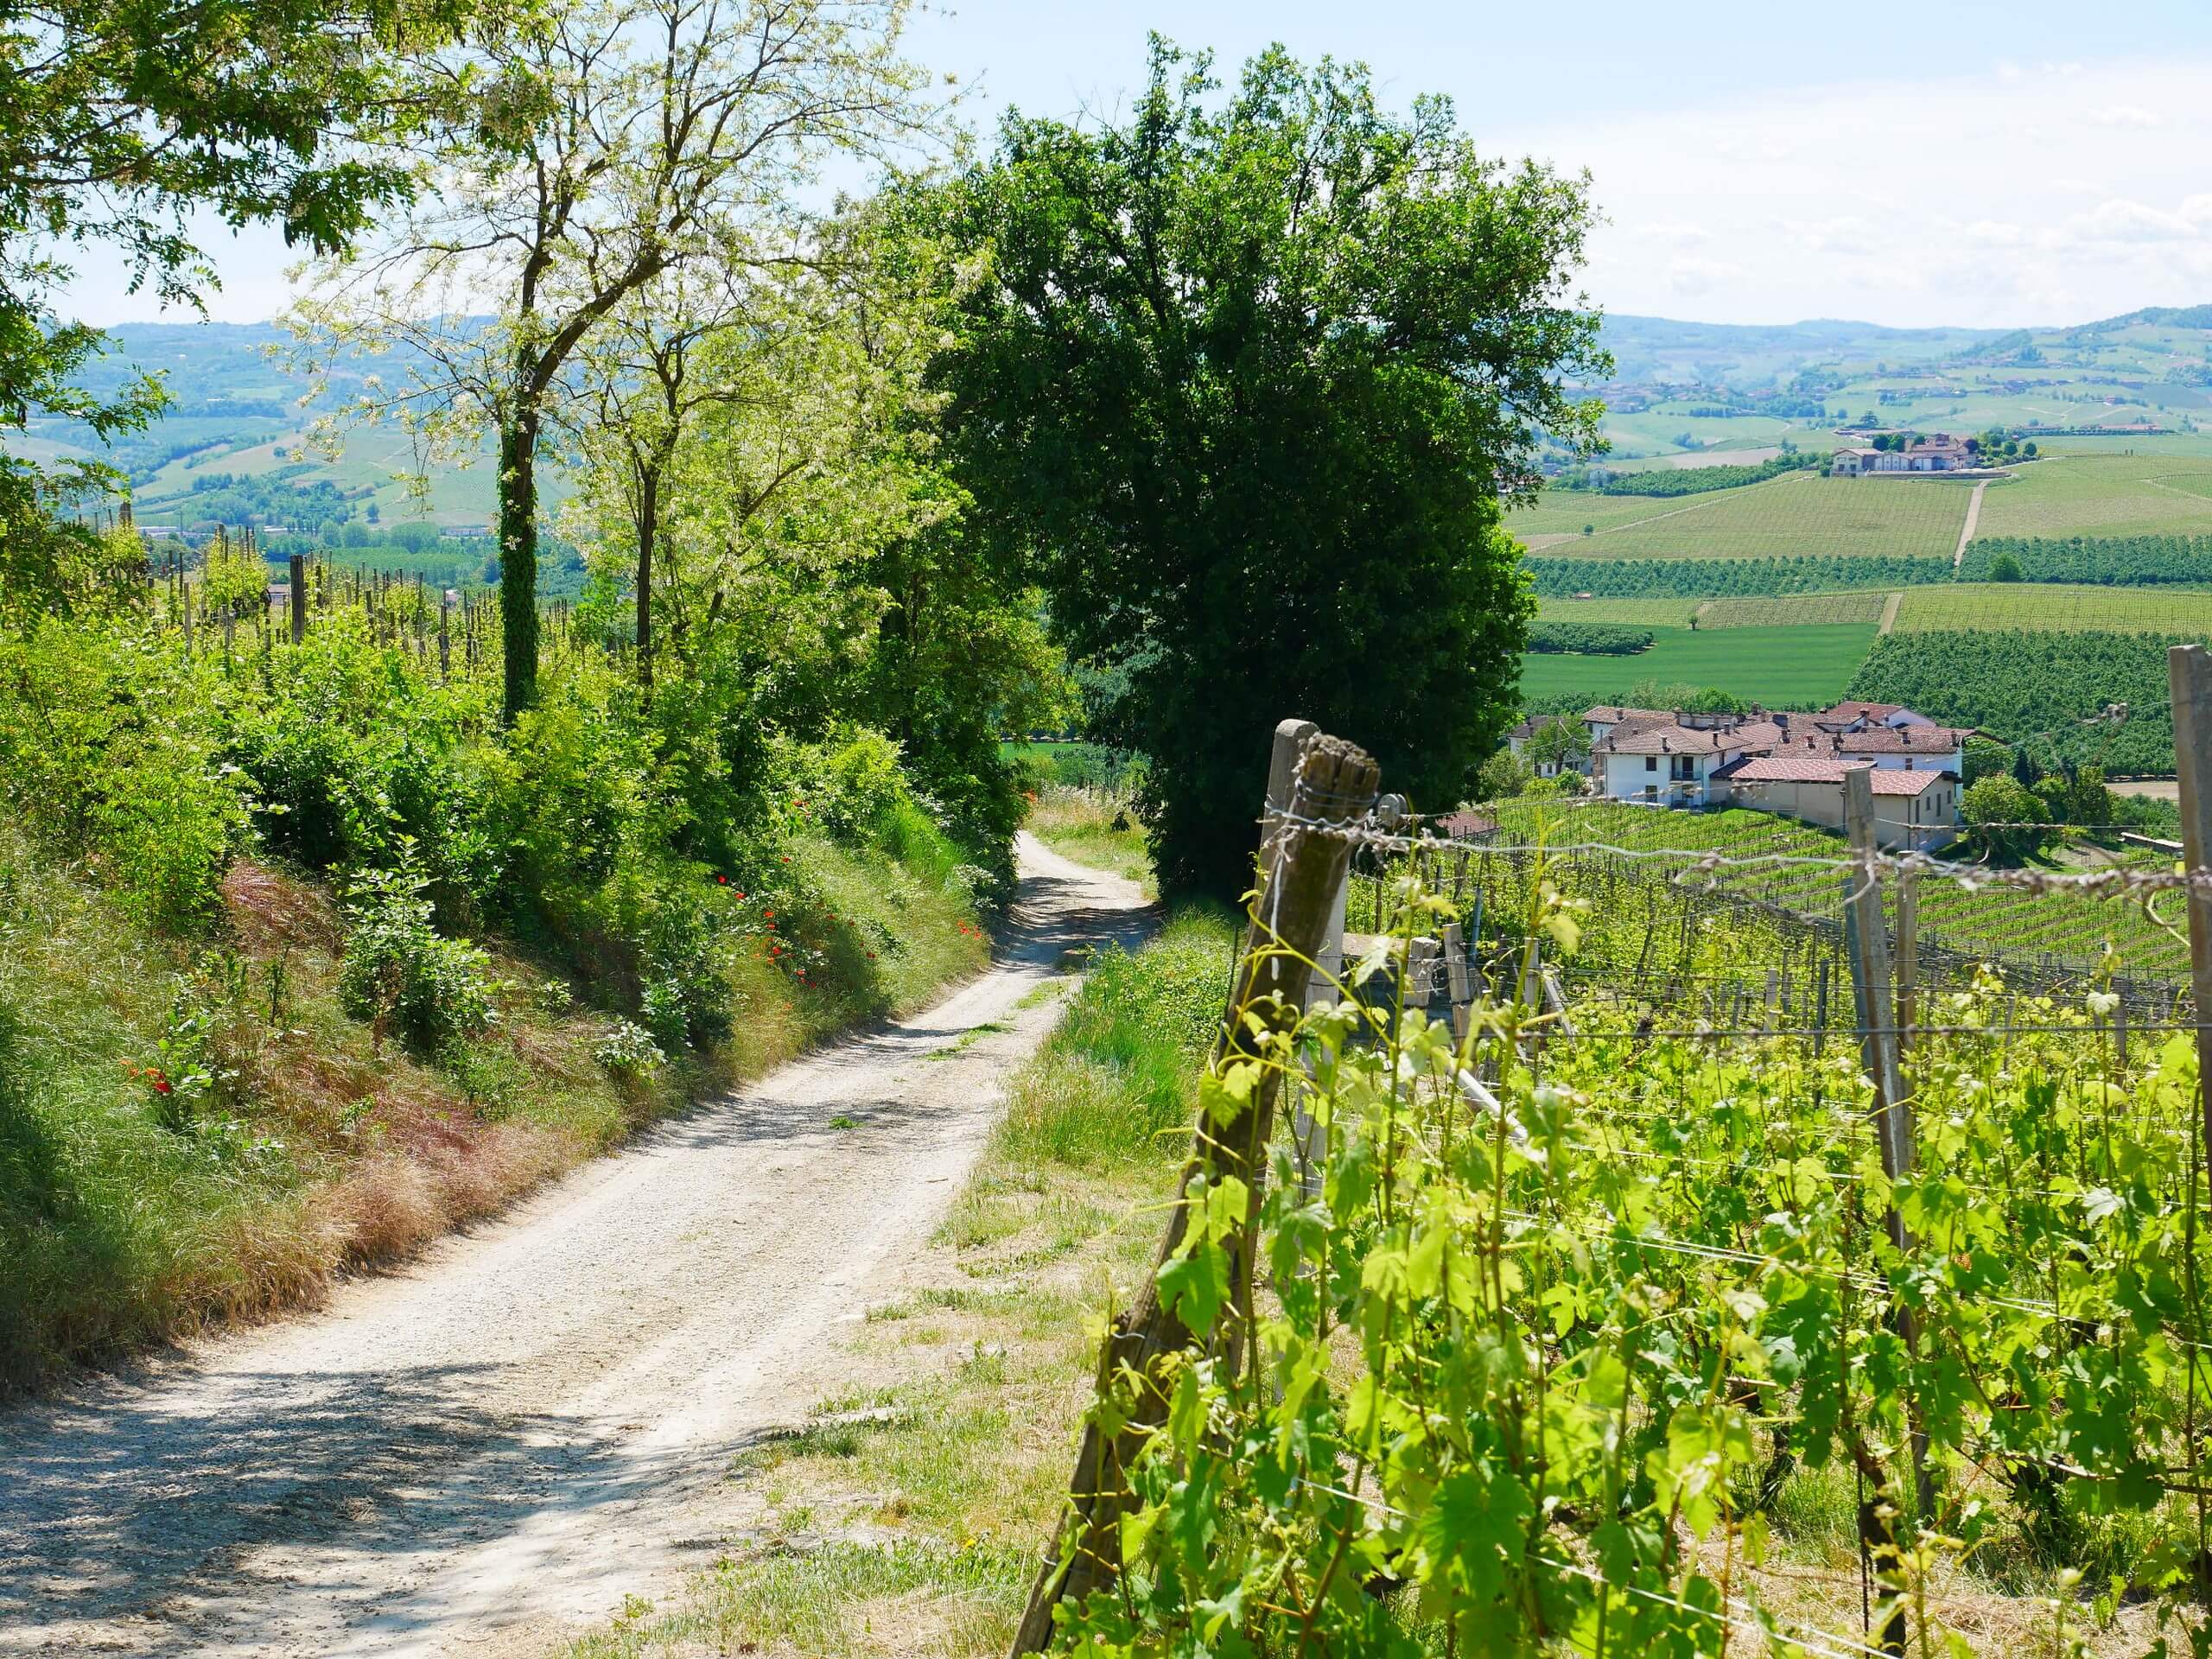 Biking through the lush vineries of the Barolo region in Italy